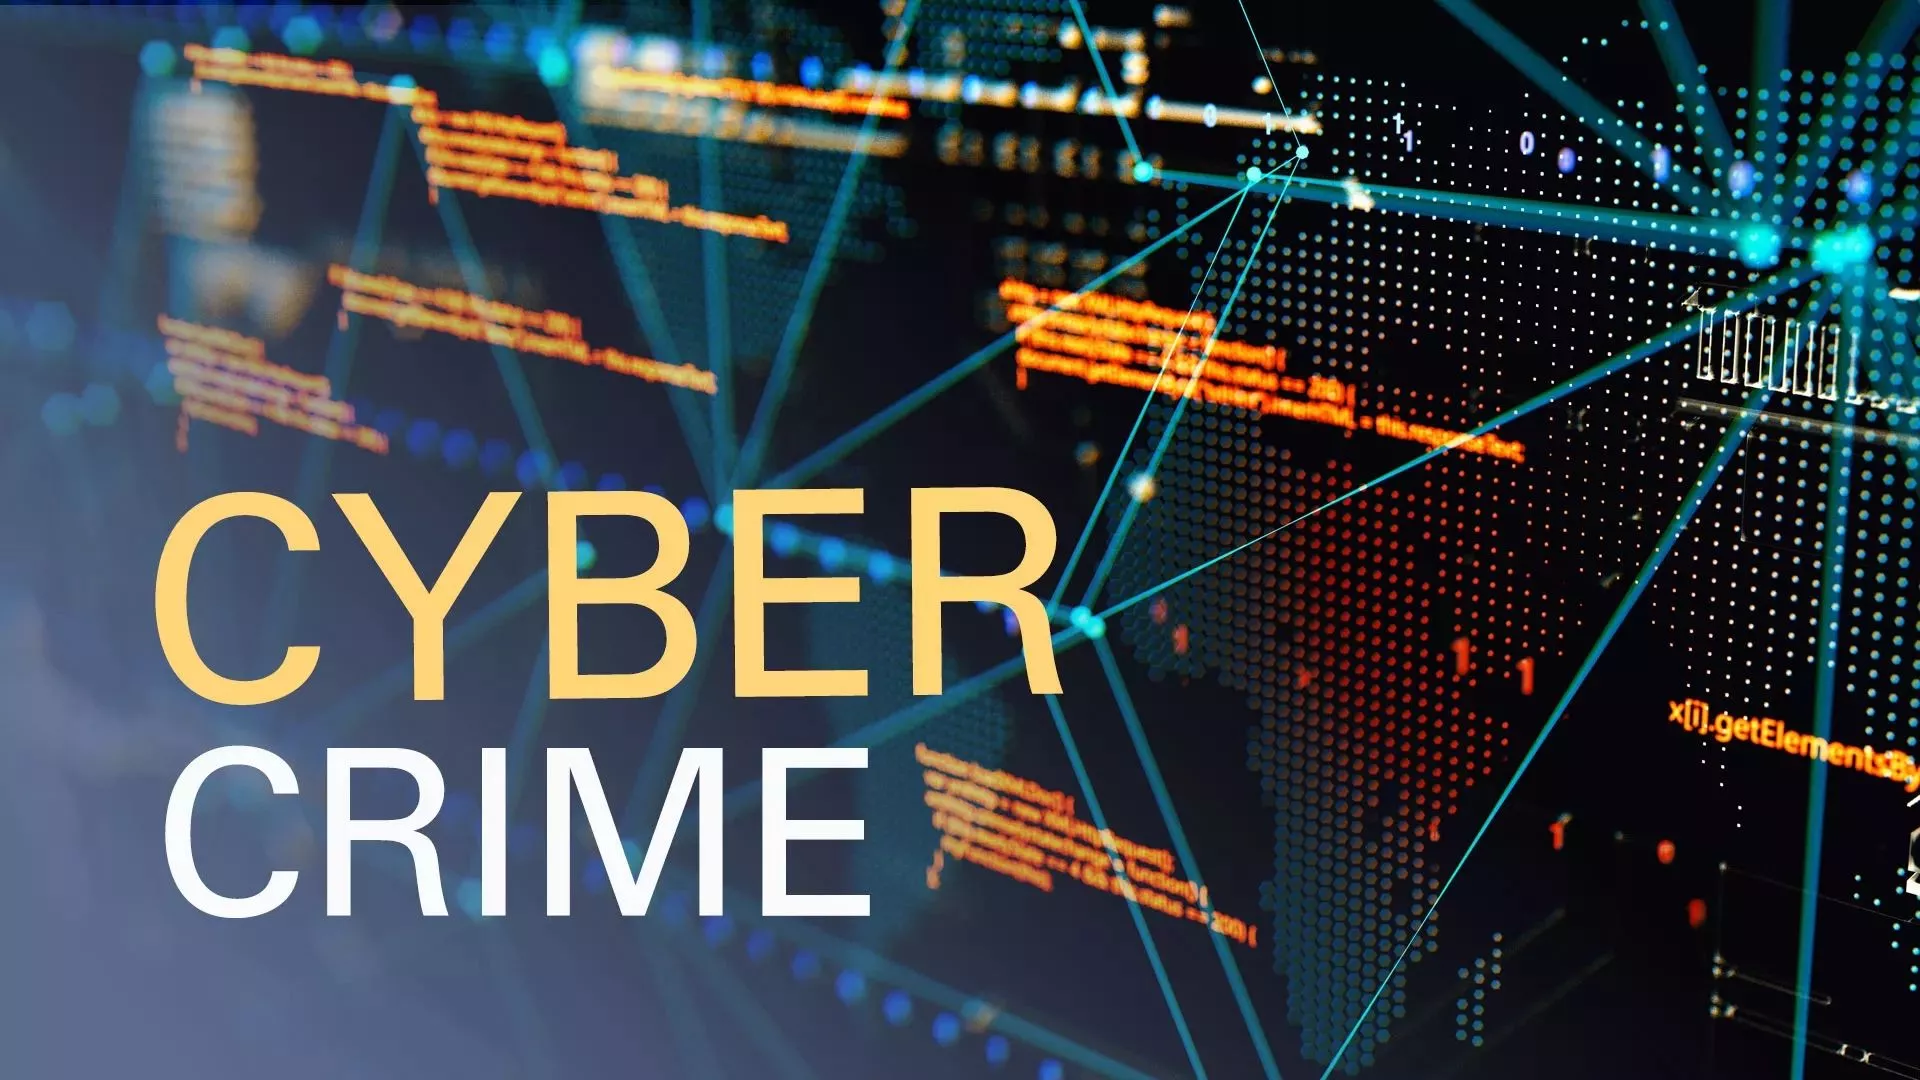 Rs.1,000 crore saved from over 4,00,000 cyber crimes: Govt - hellobanker